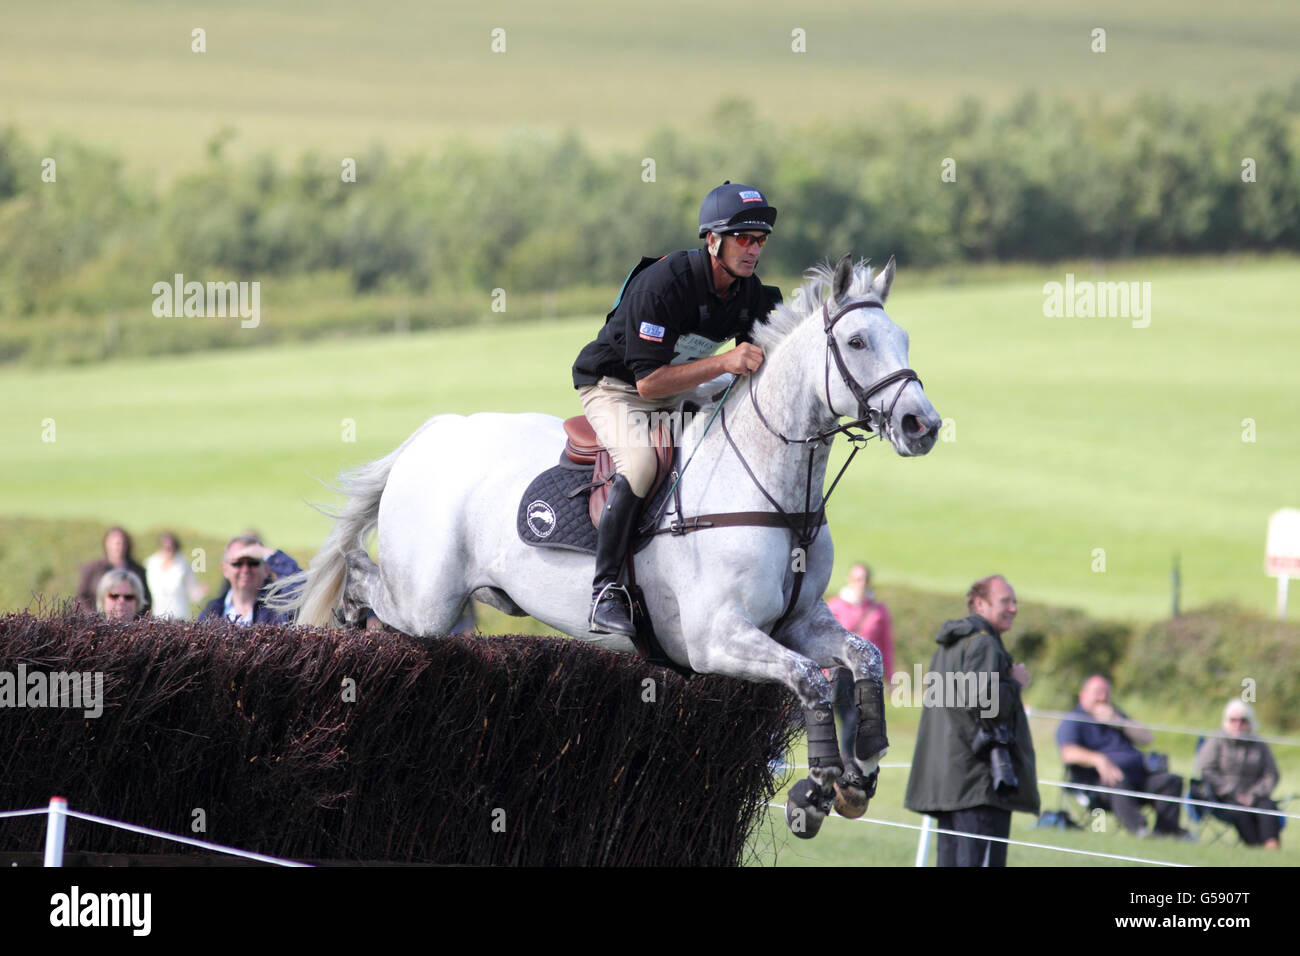 New Zealand's Andrew Nicholson rides Avebury in the St James's Place Barbury International Horse Trials during day three of the Barbury International Horse Trials at Barbury Castle Estate, Wiltshire. Stock Photo